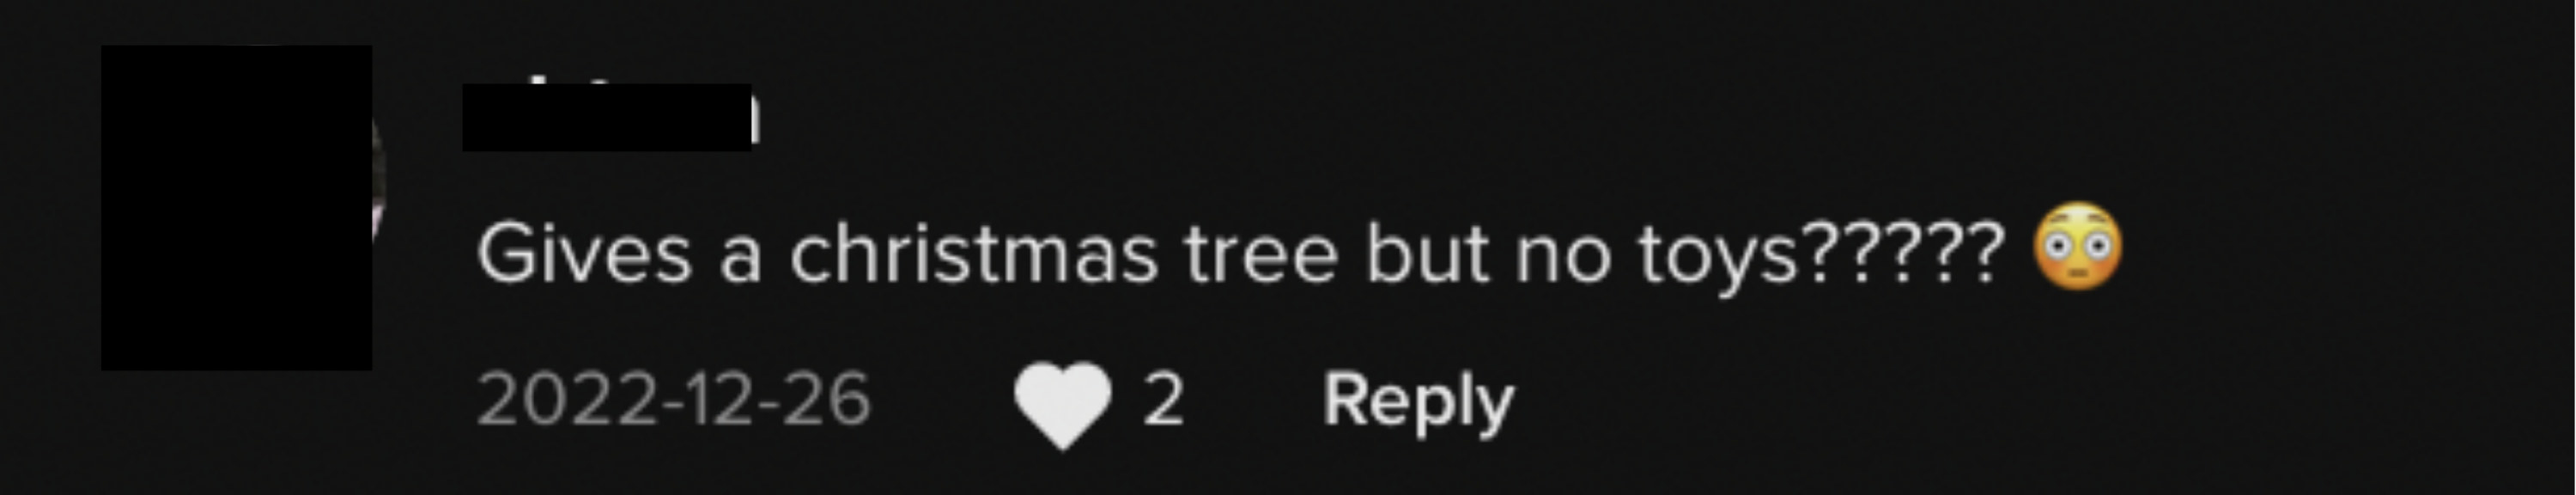 comments says gives a christmas tree but no toys?????